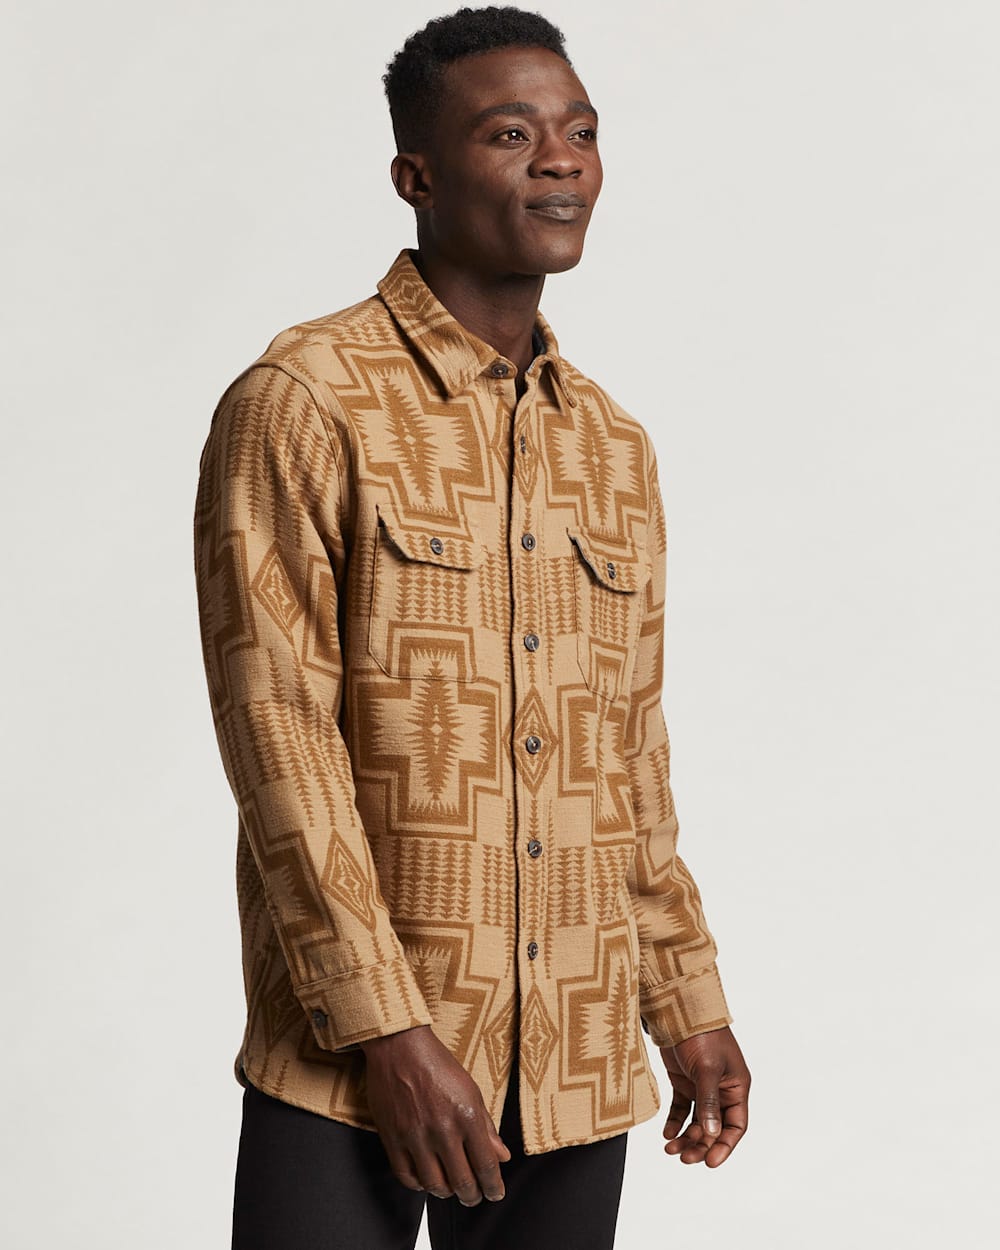 ALTERNATE VIEW OF MEN'S DOUBLESOFT DRIFTWOOD SHIRT IN TAN/BROWN HARDING image number 7